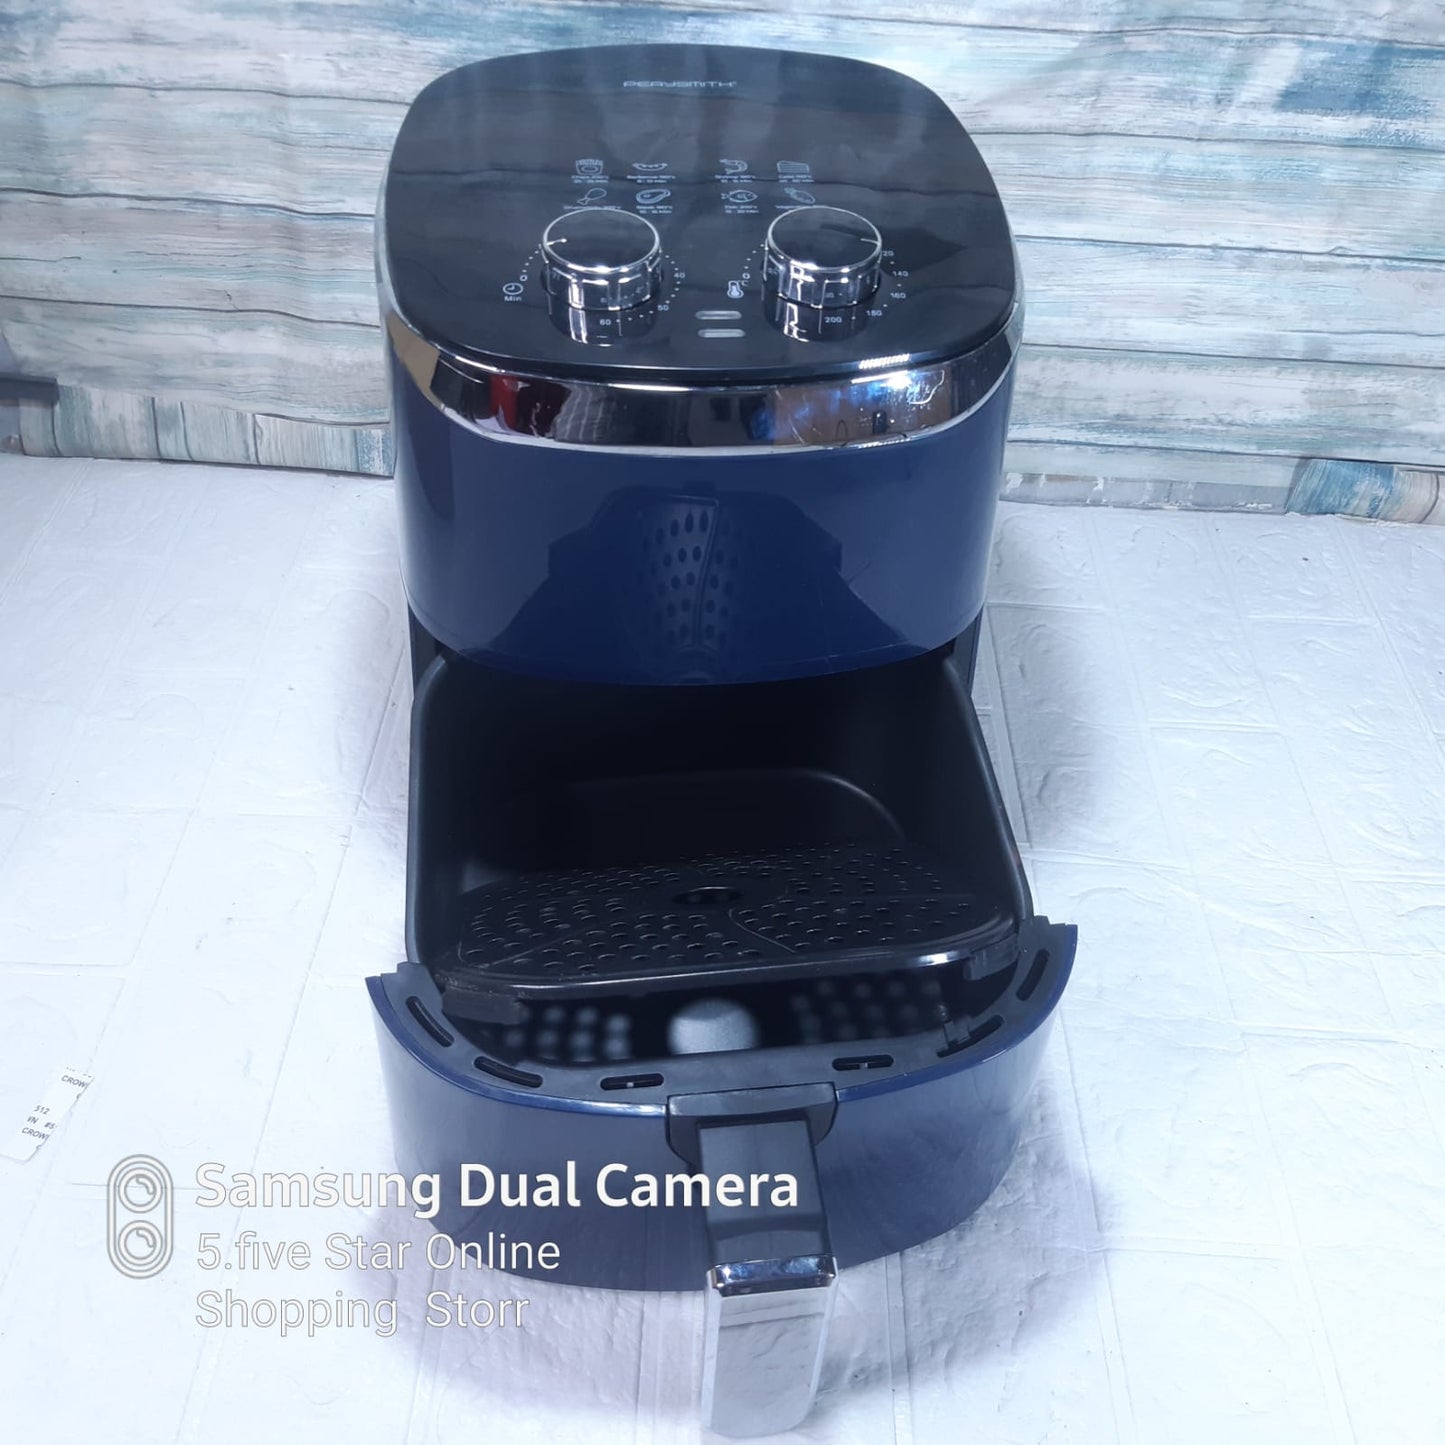 PerySmith Imported Air Fryer | 4.2 Litter Capacity